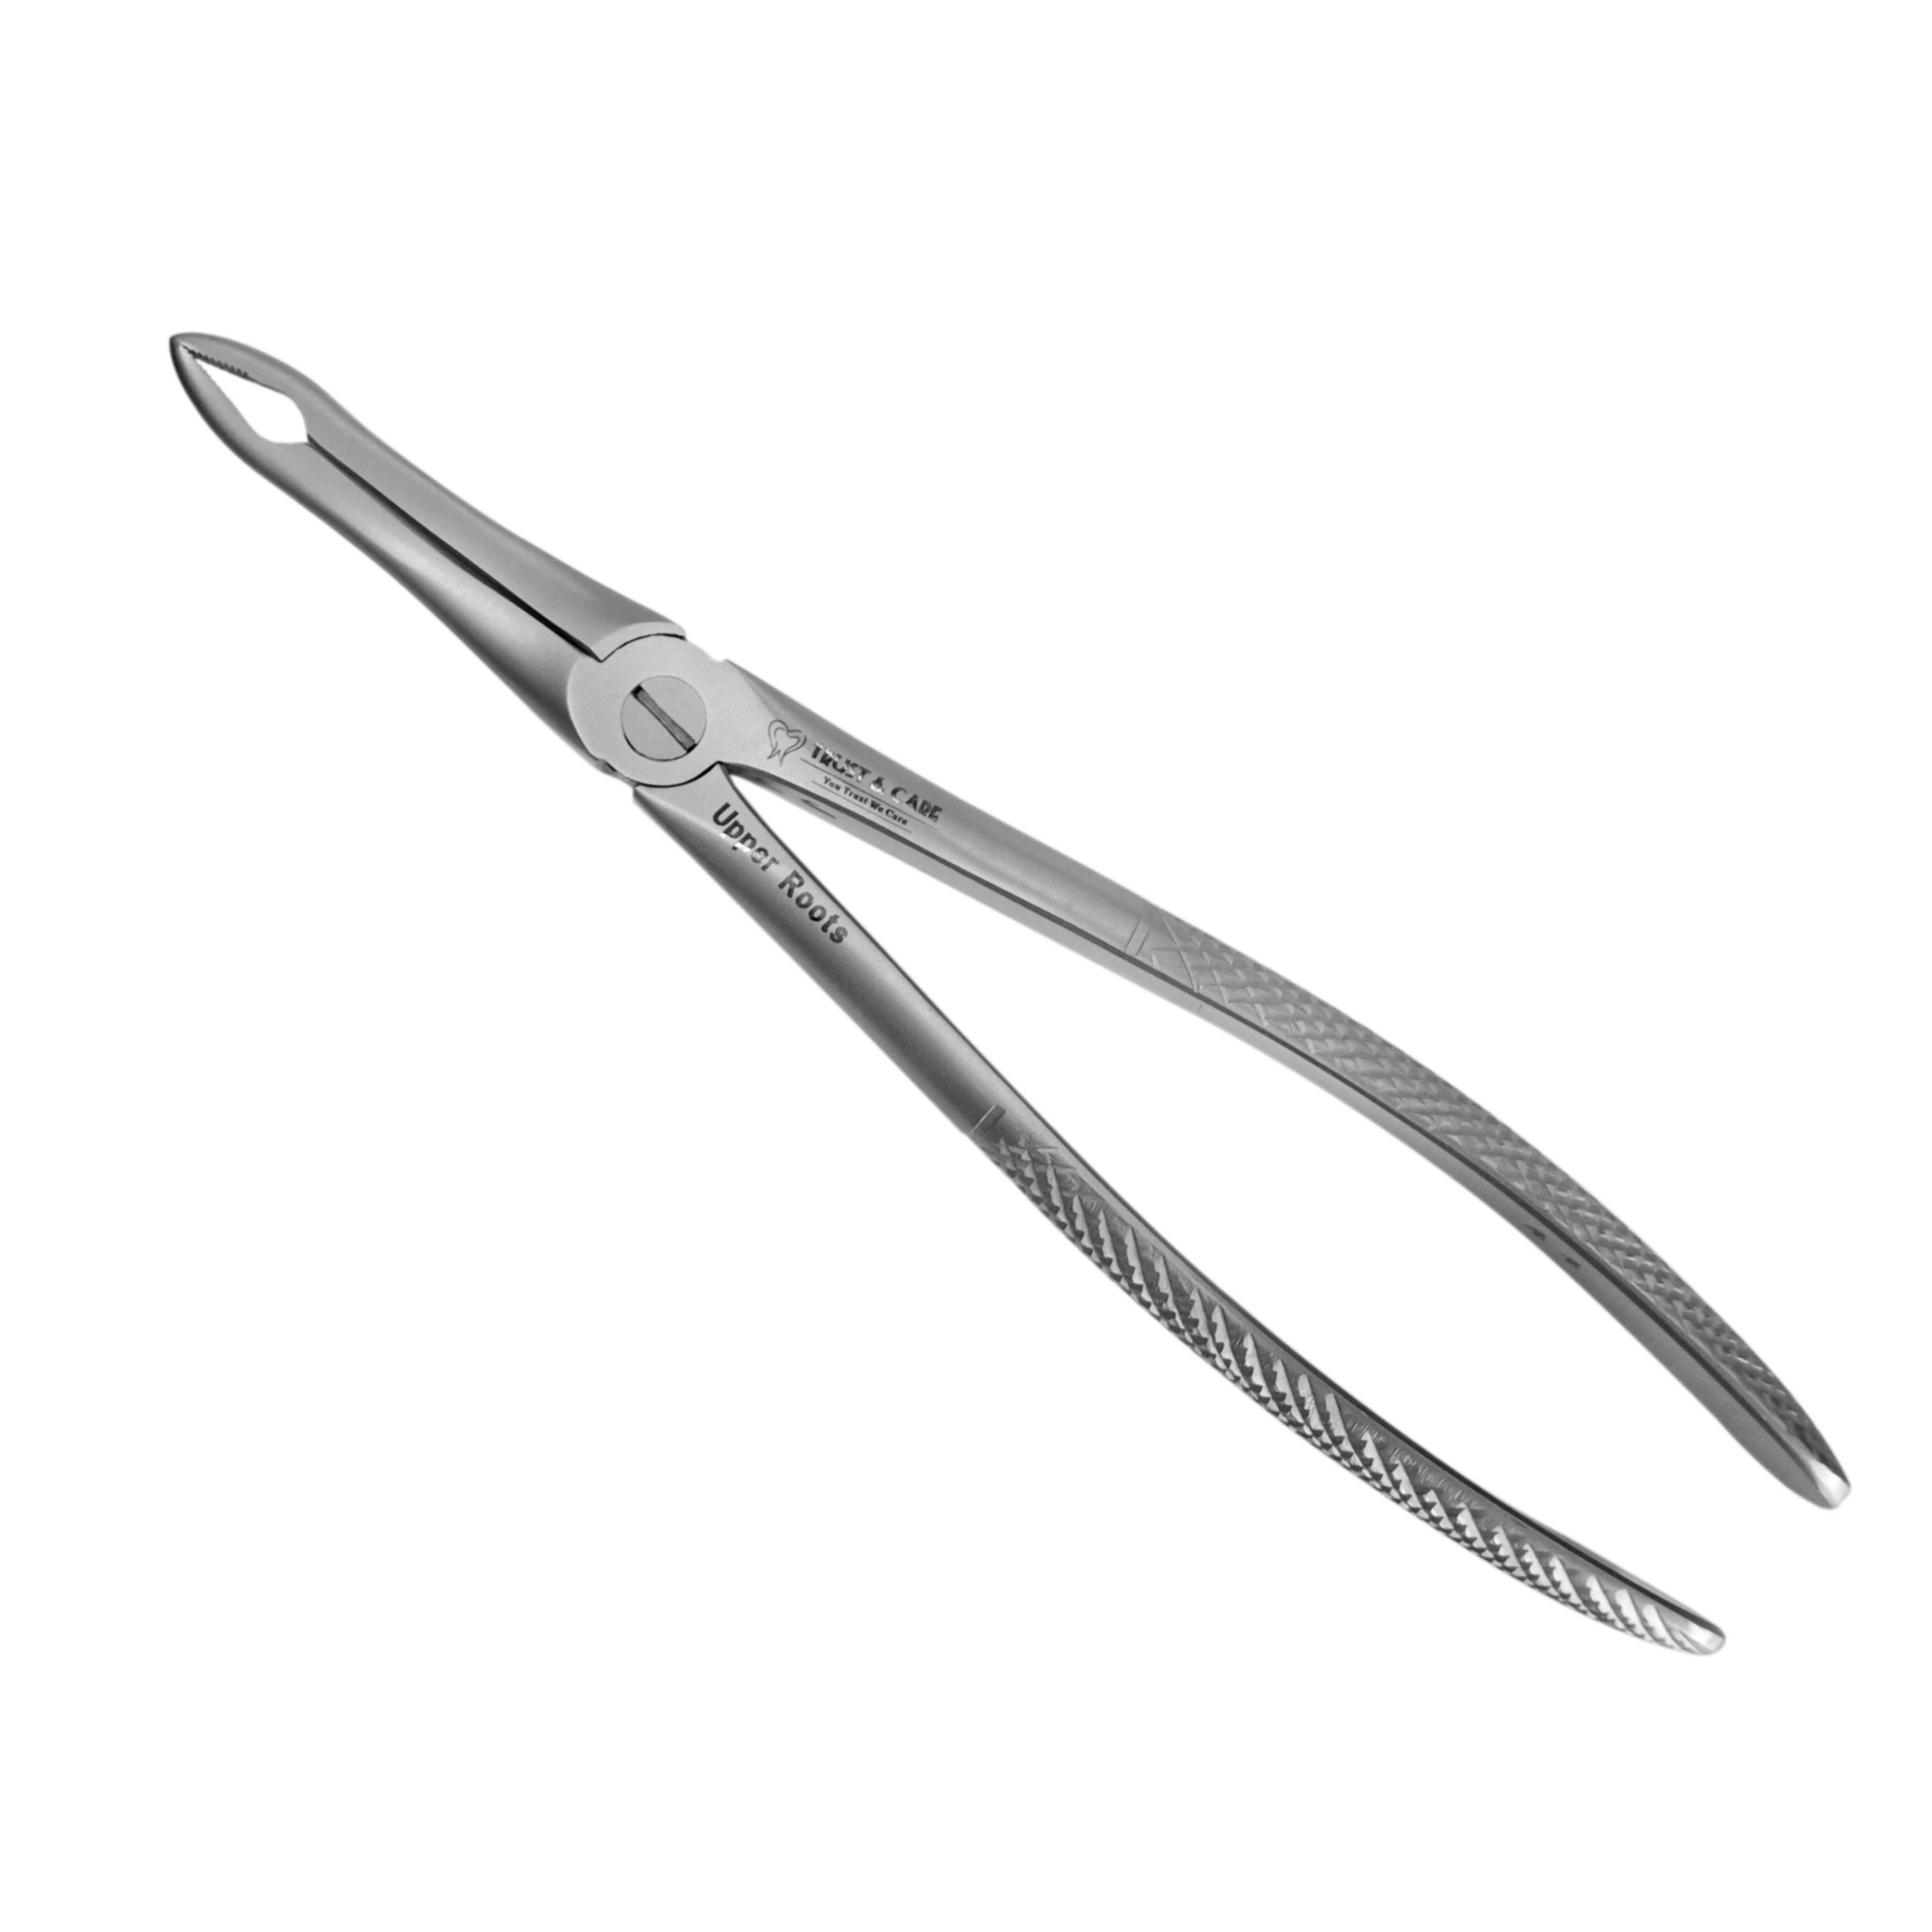 Trust & Care Tooth Extraction Forcep Upper Roots Fig No. 44 Standard